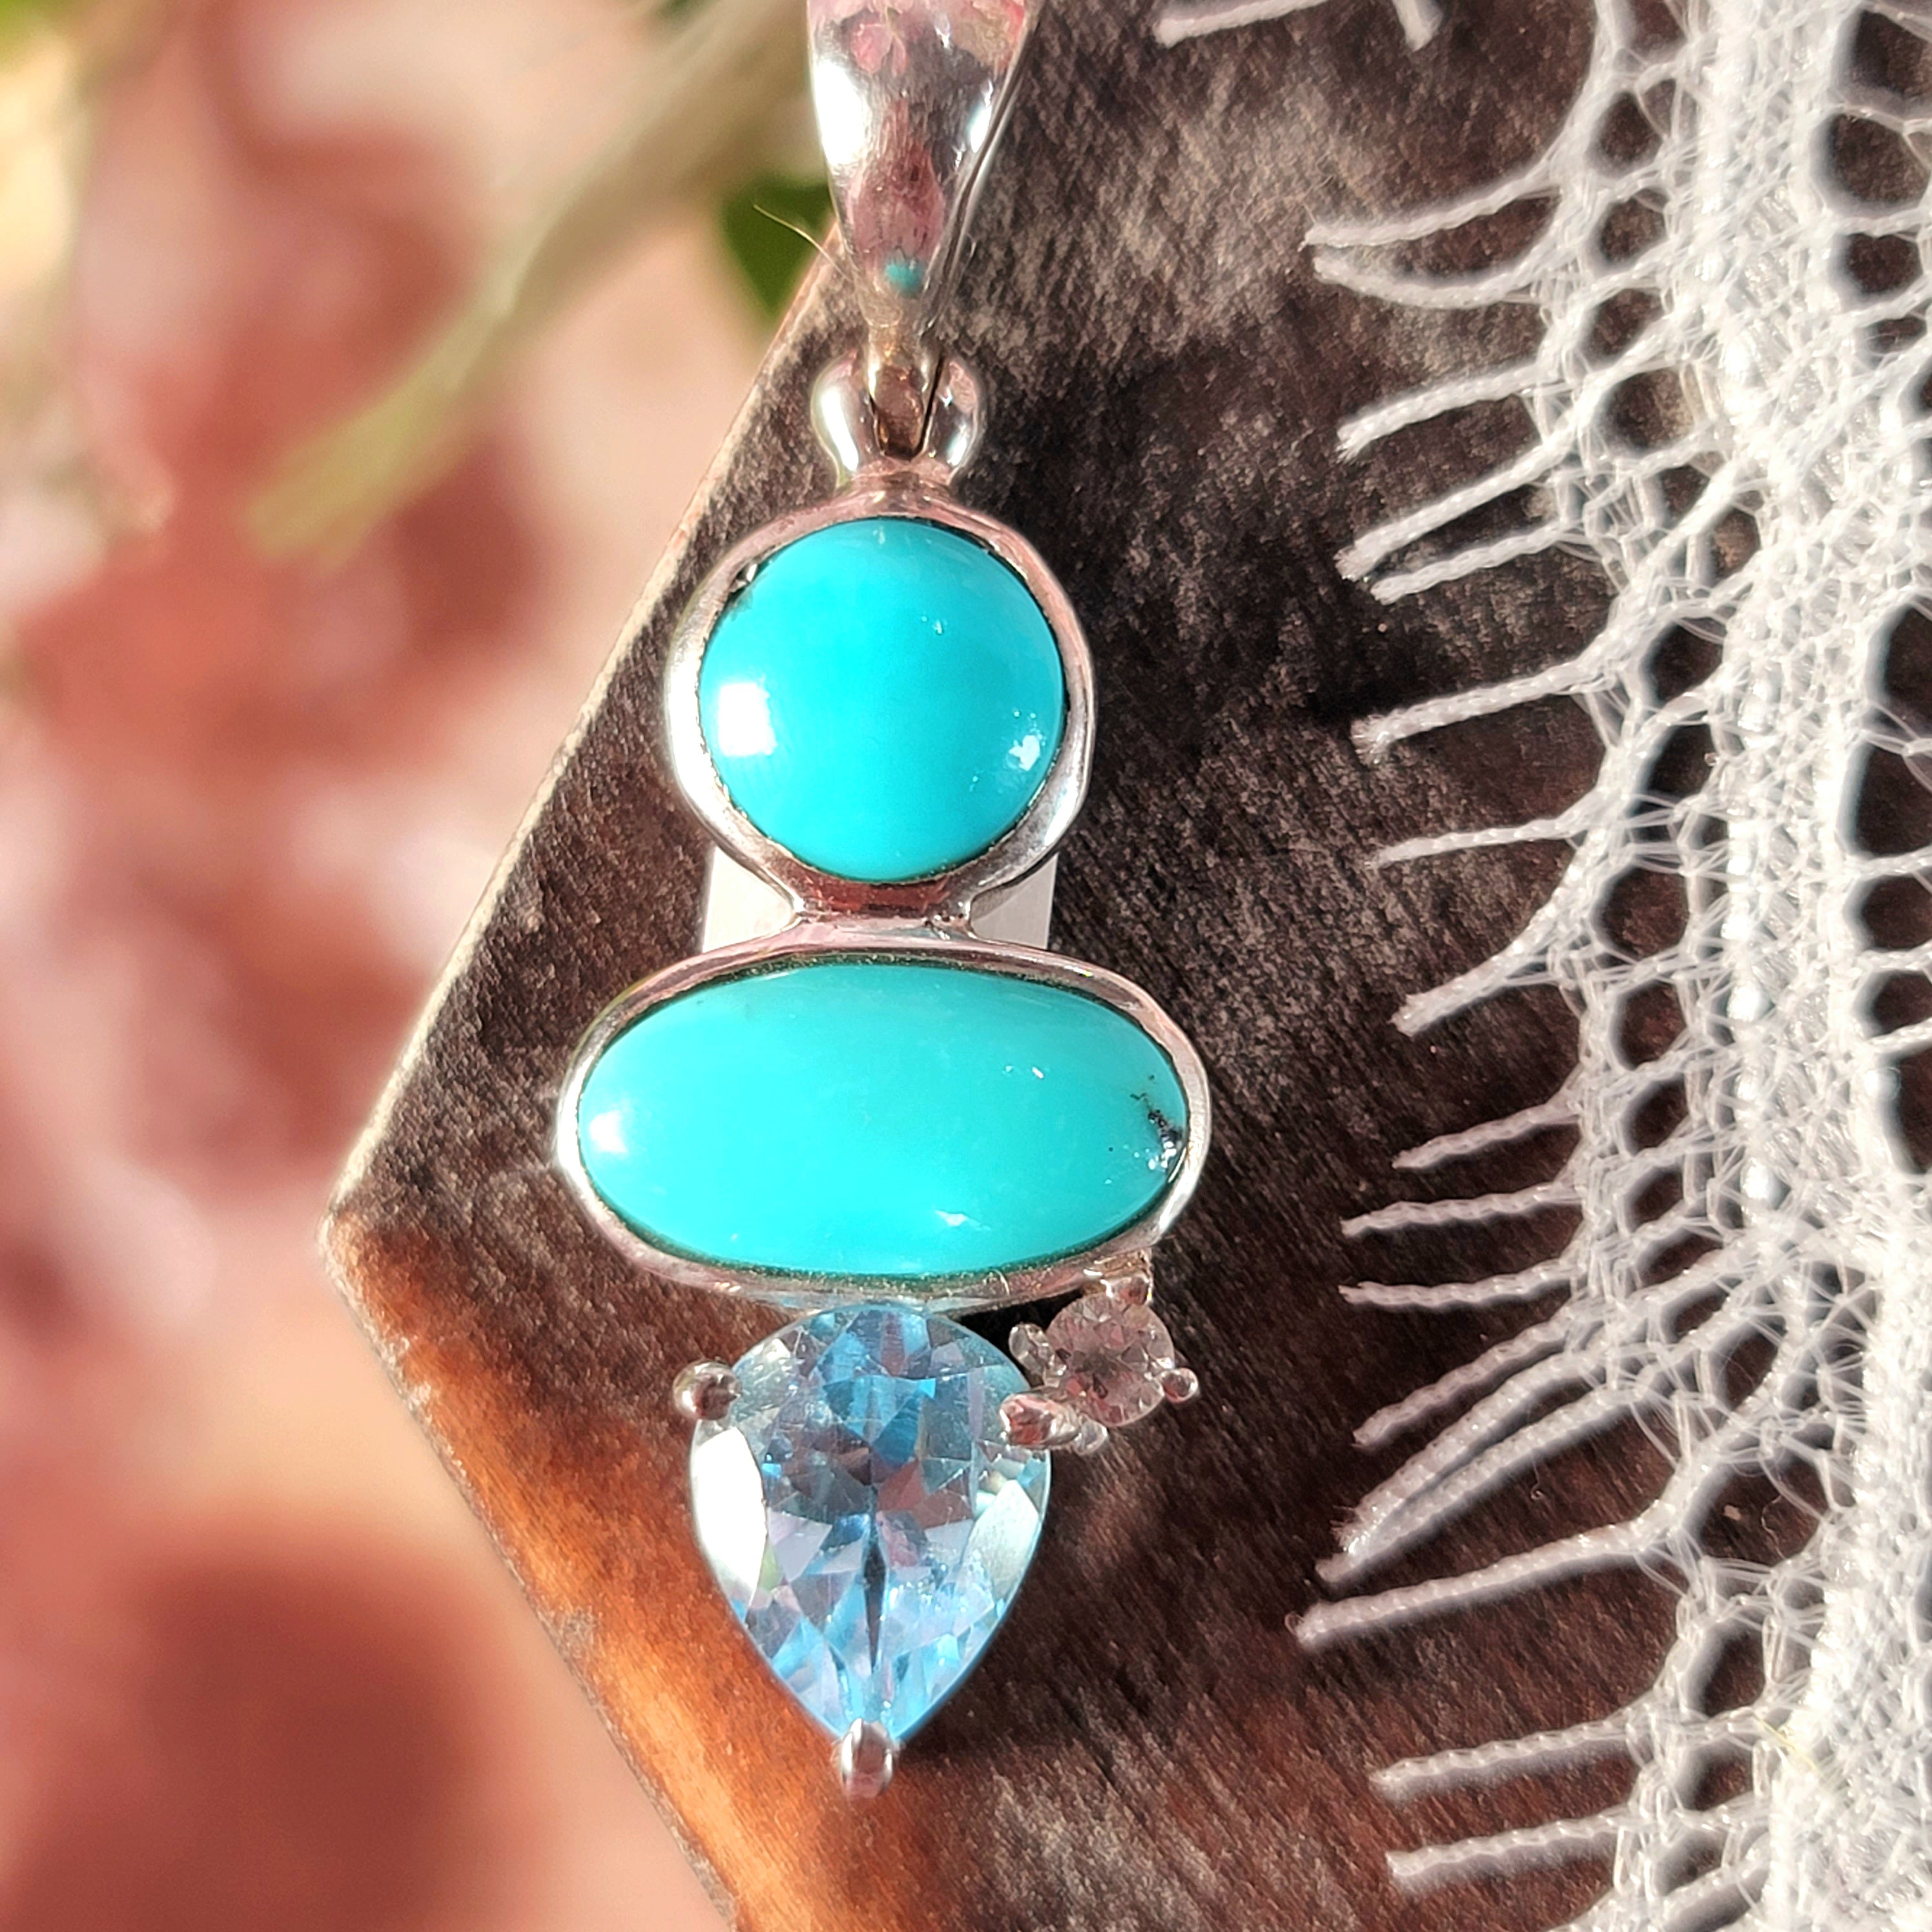 Turquoise x Blue Topaz Pendant for Good Luck, Love, Prosperity and Protection